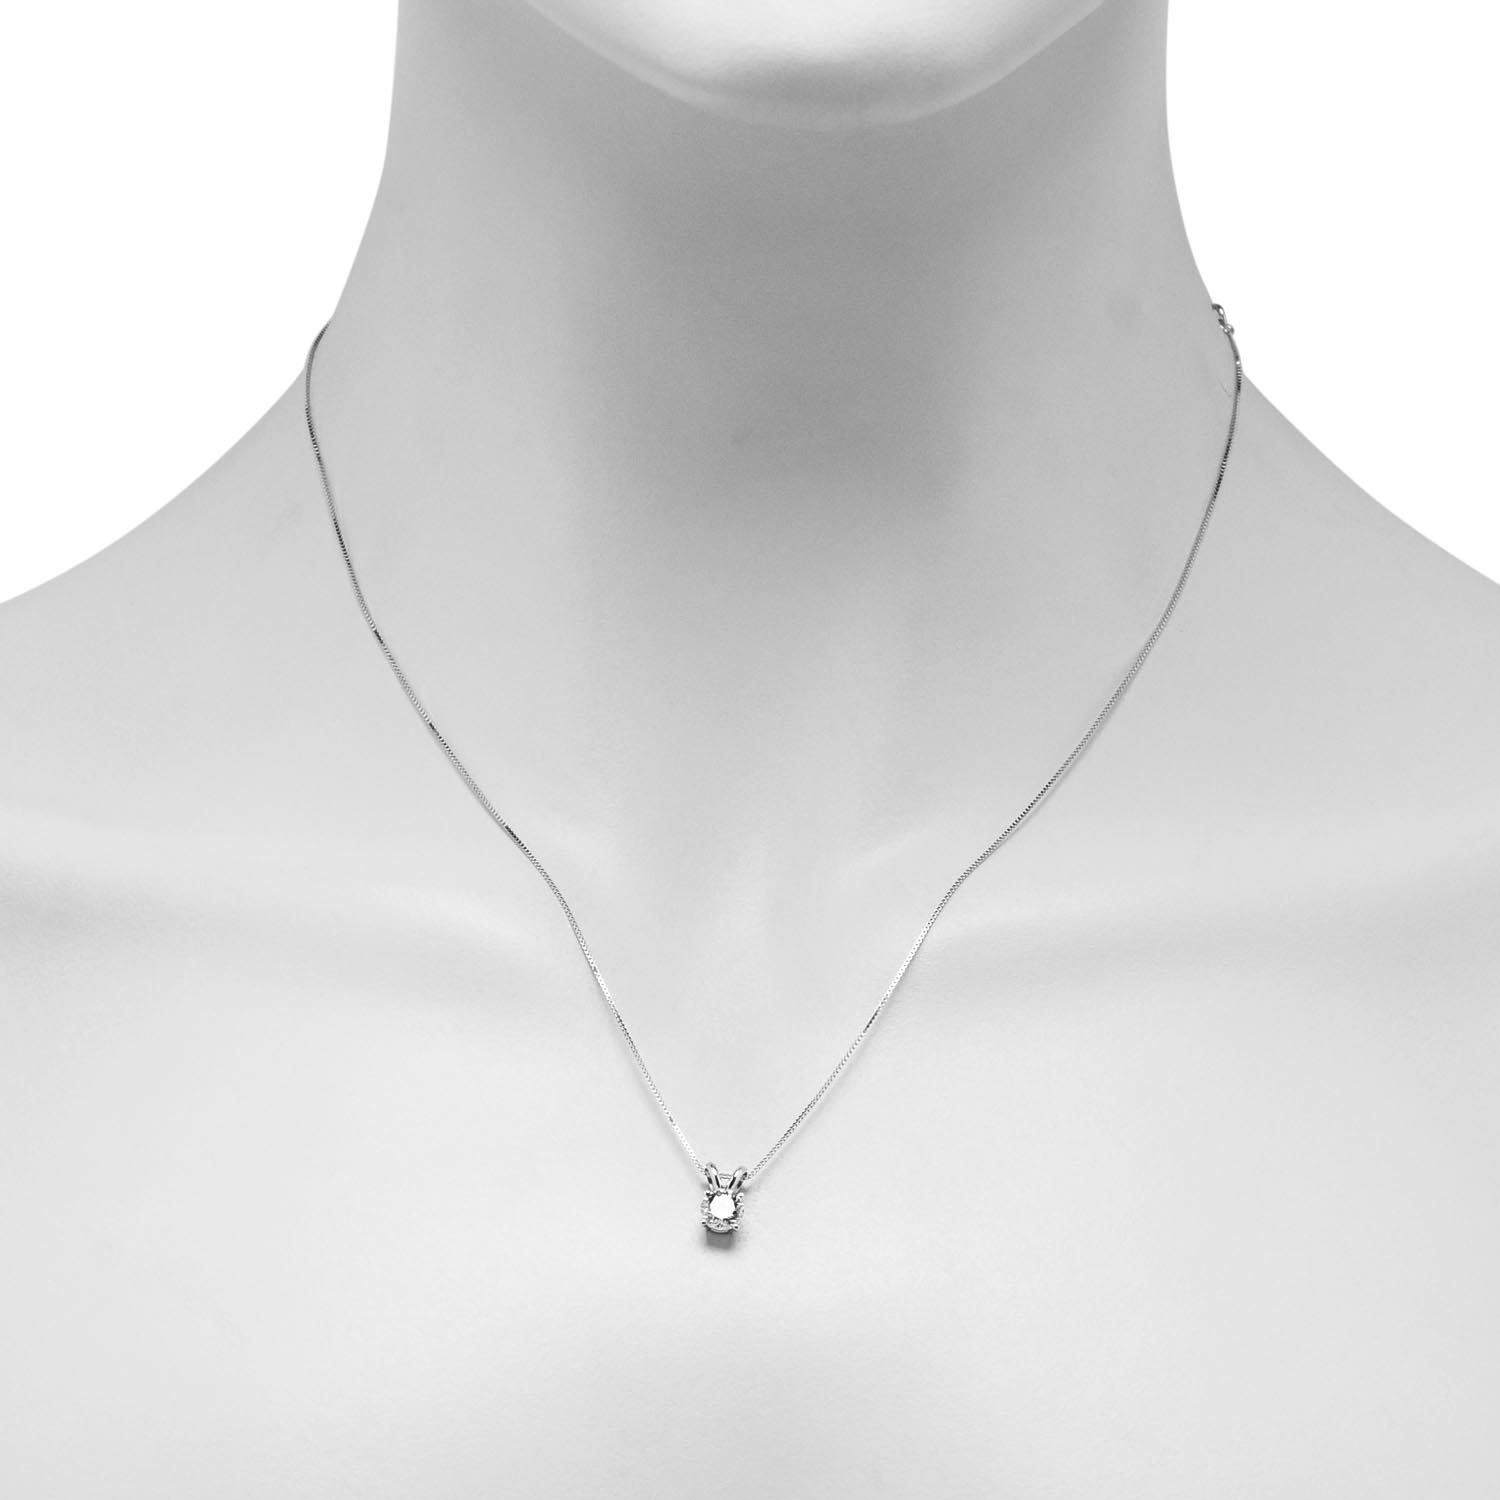 Diamond Solitaire Necklace in 14kt White Gold (1/2ct)